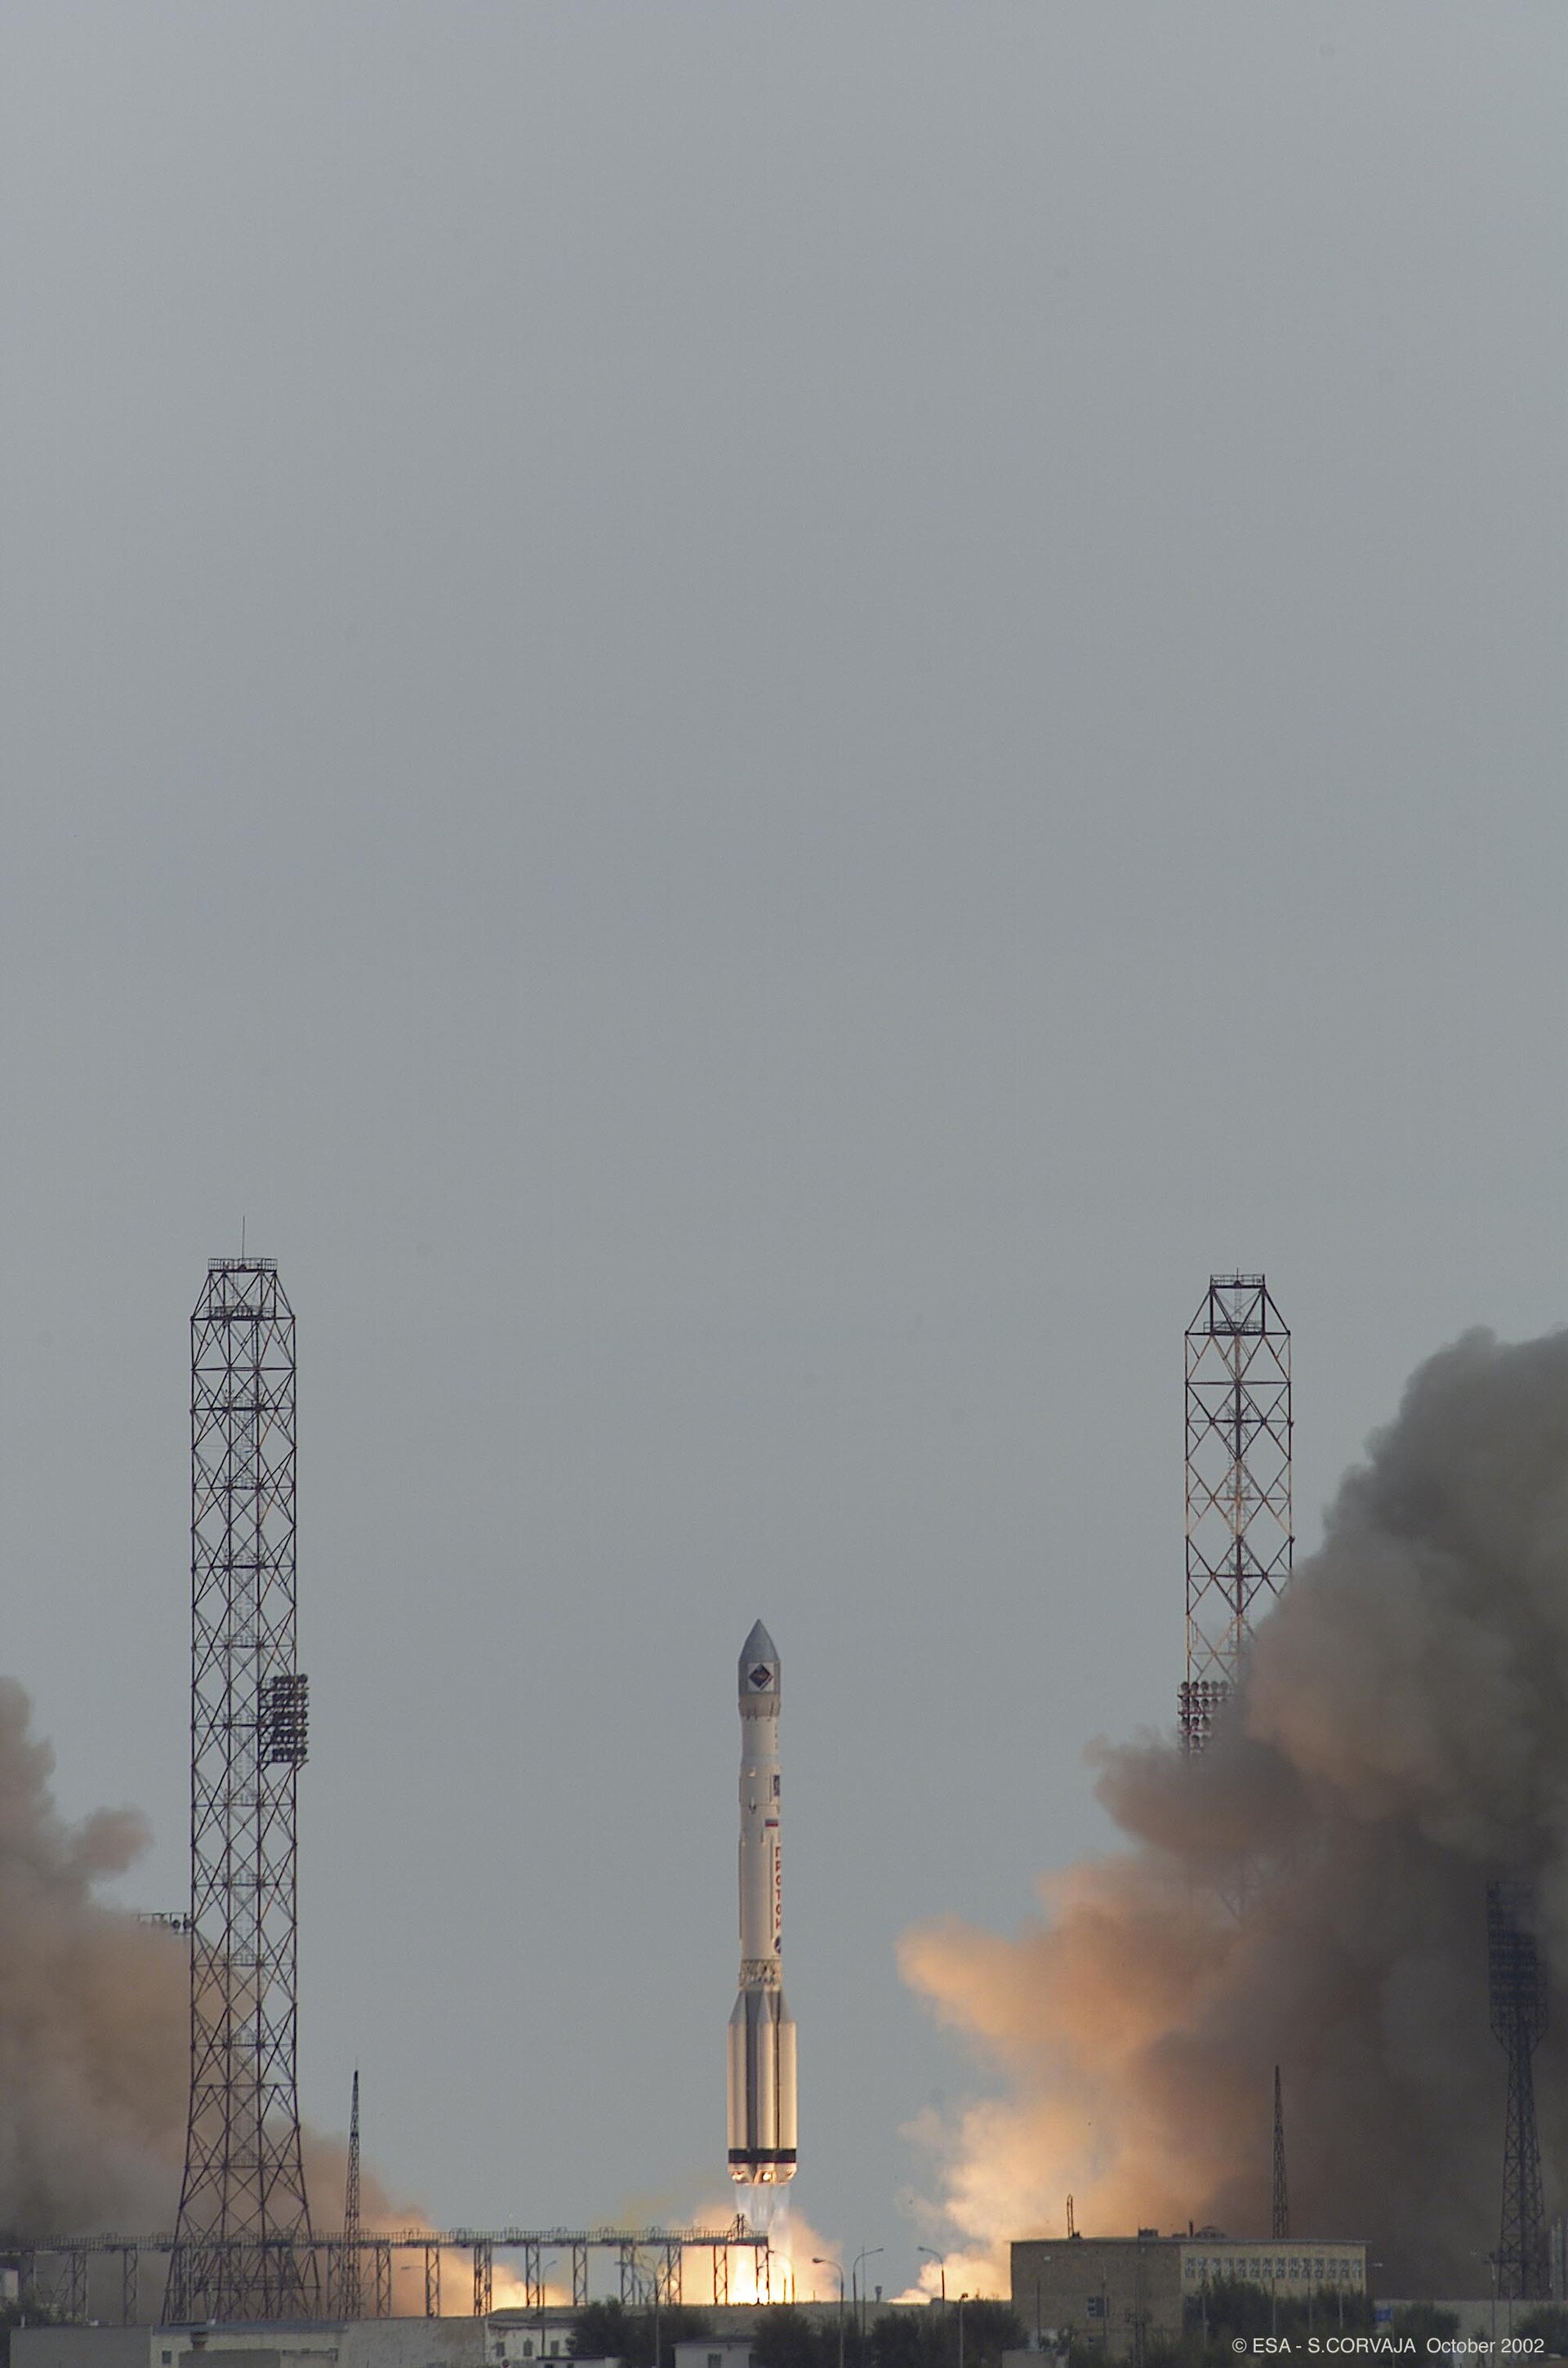 Proton successfully launched Integral this morning at 6:41 CEST